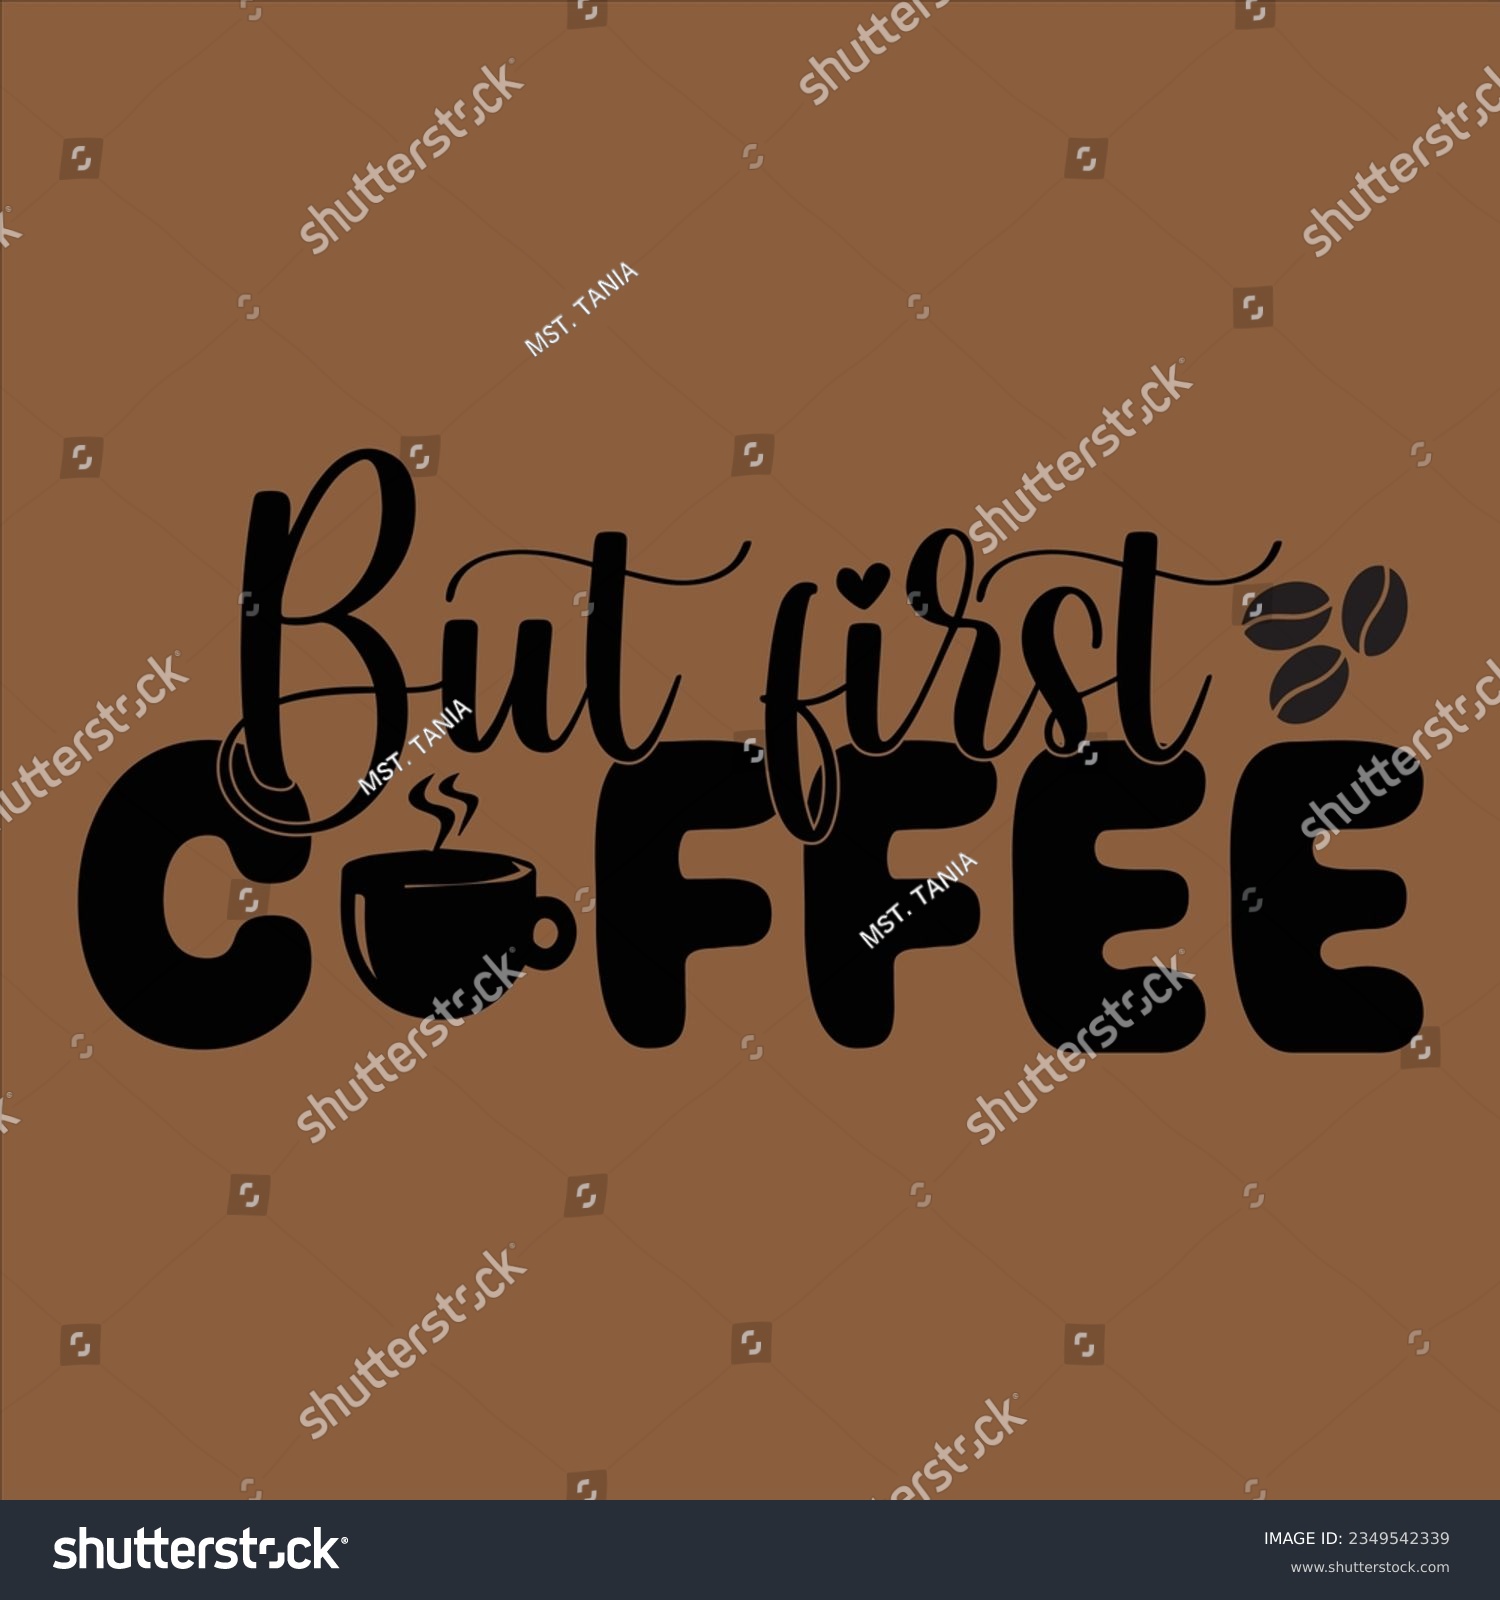 SVG of But first  coffee svg,ok but first iced coffee,1st october international coffee day,international coffee day,last's takea break,live love  coffee,world coffee day , is my favarite design. svg